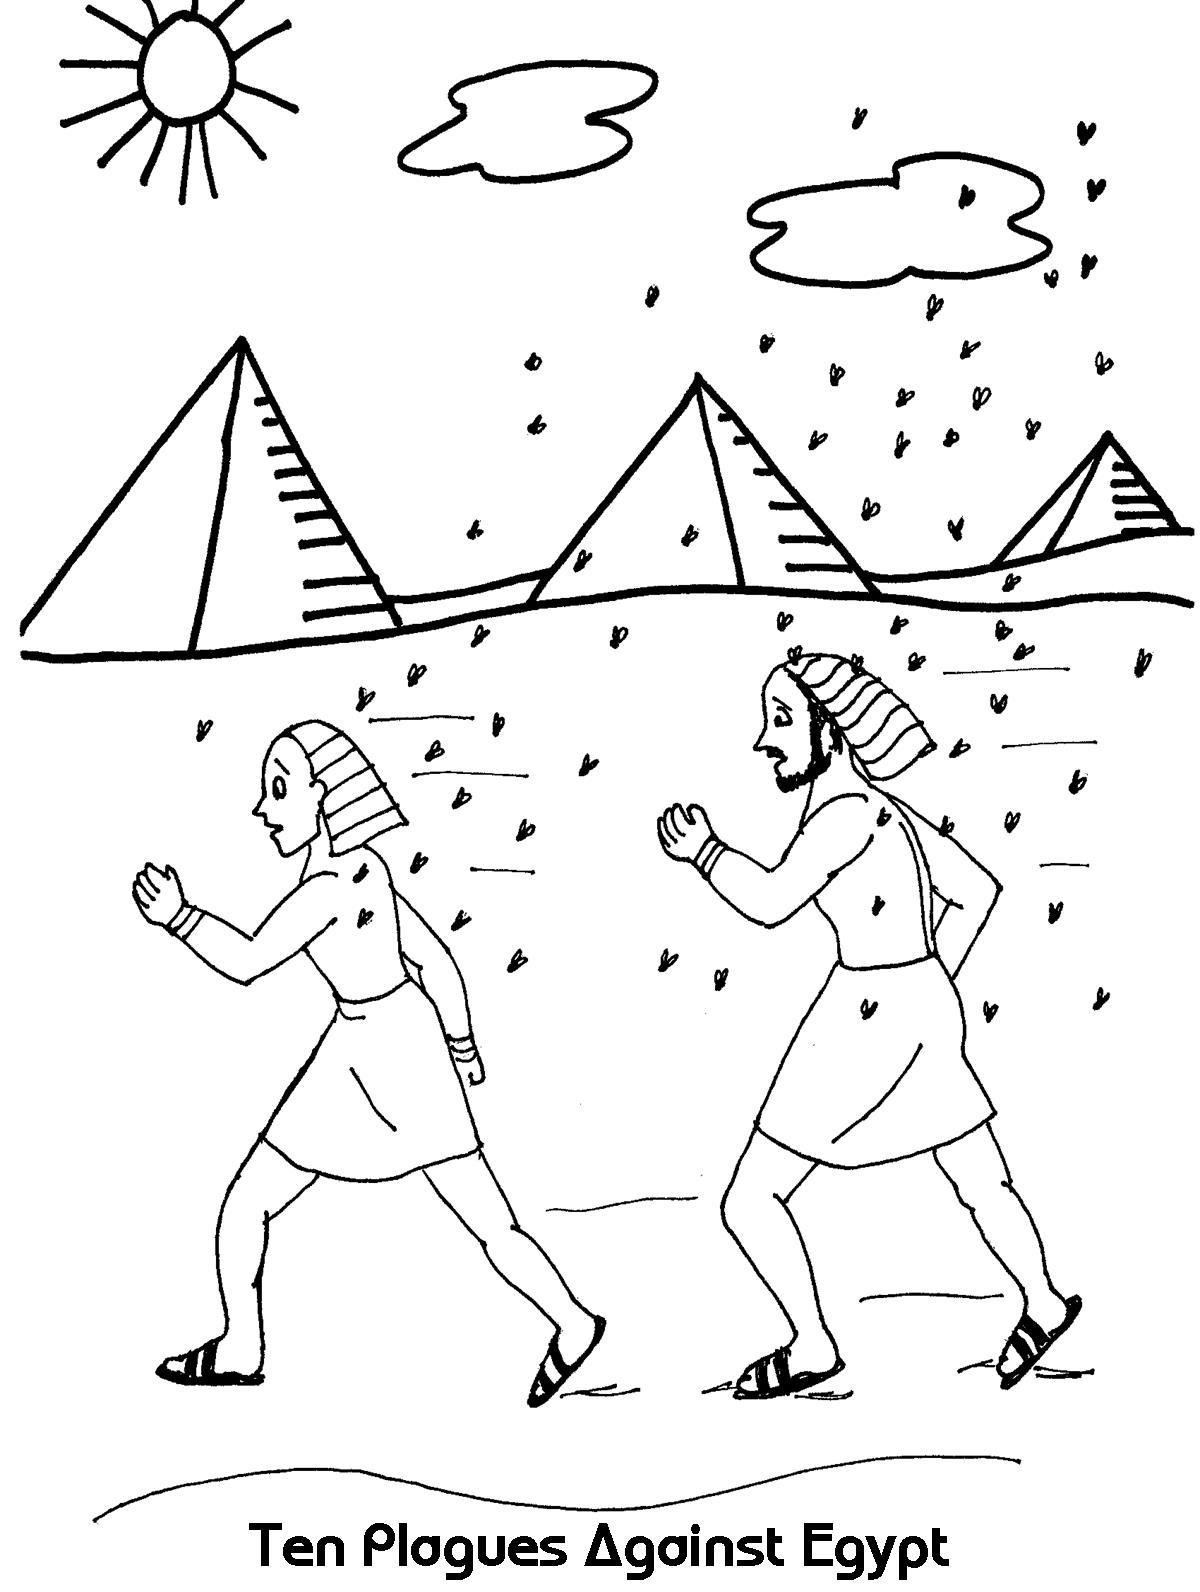 10 Plagues Of Egypt Coloring Pages at Free printable